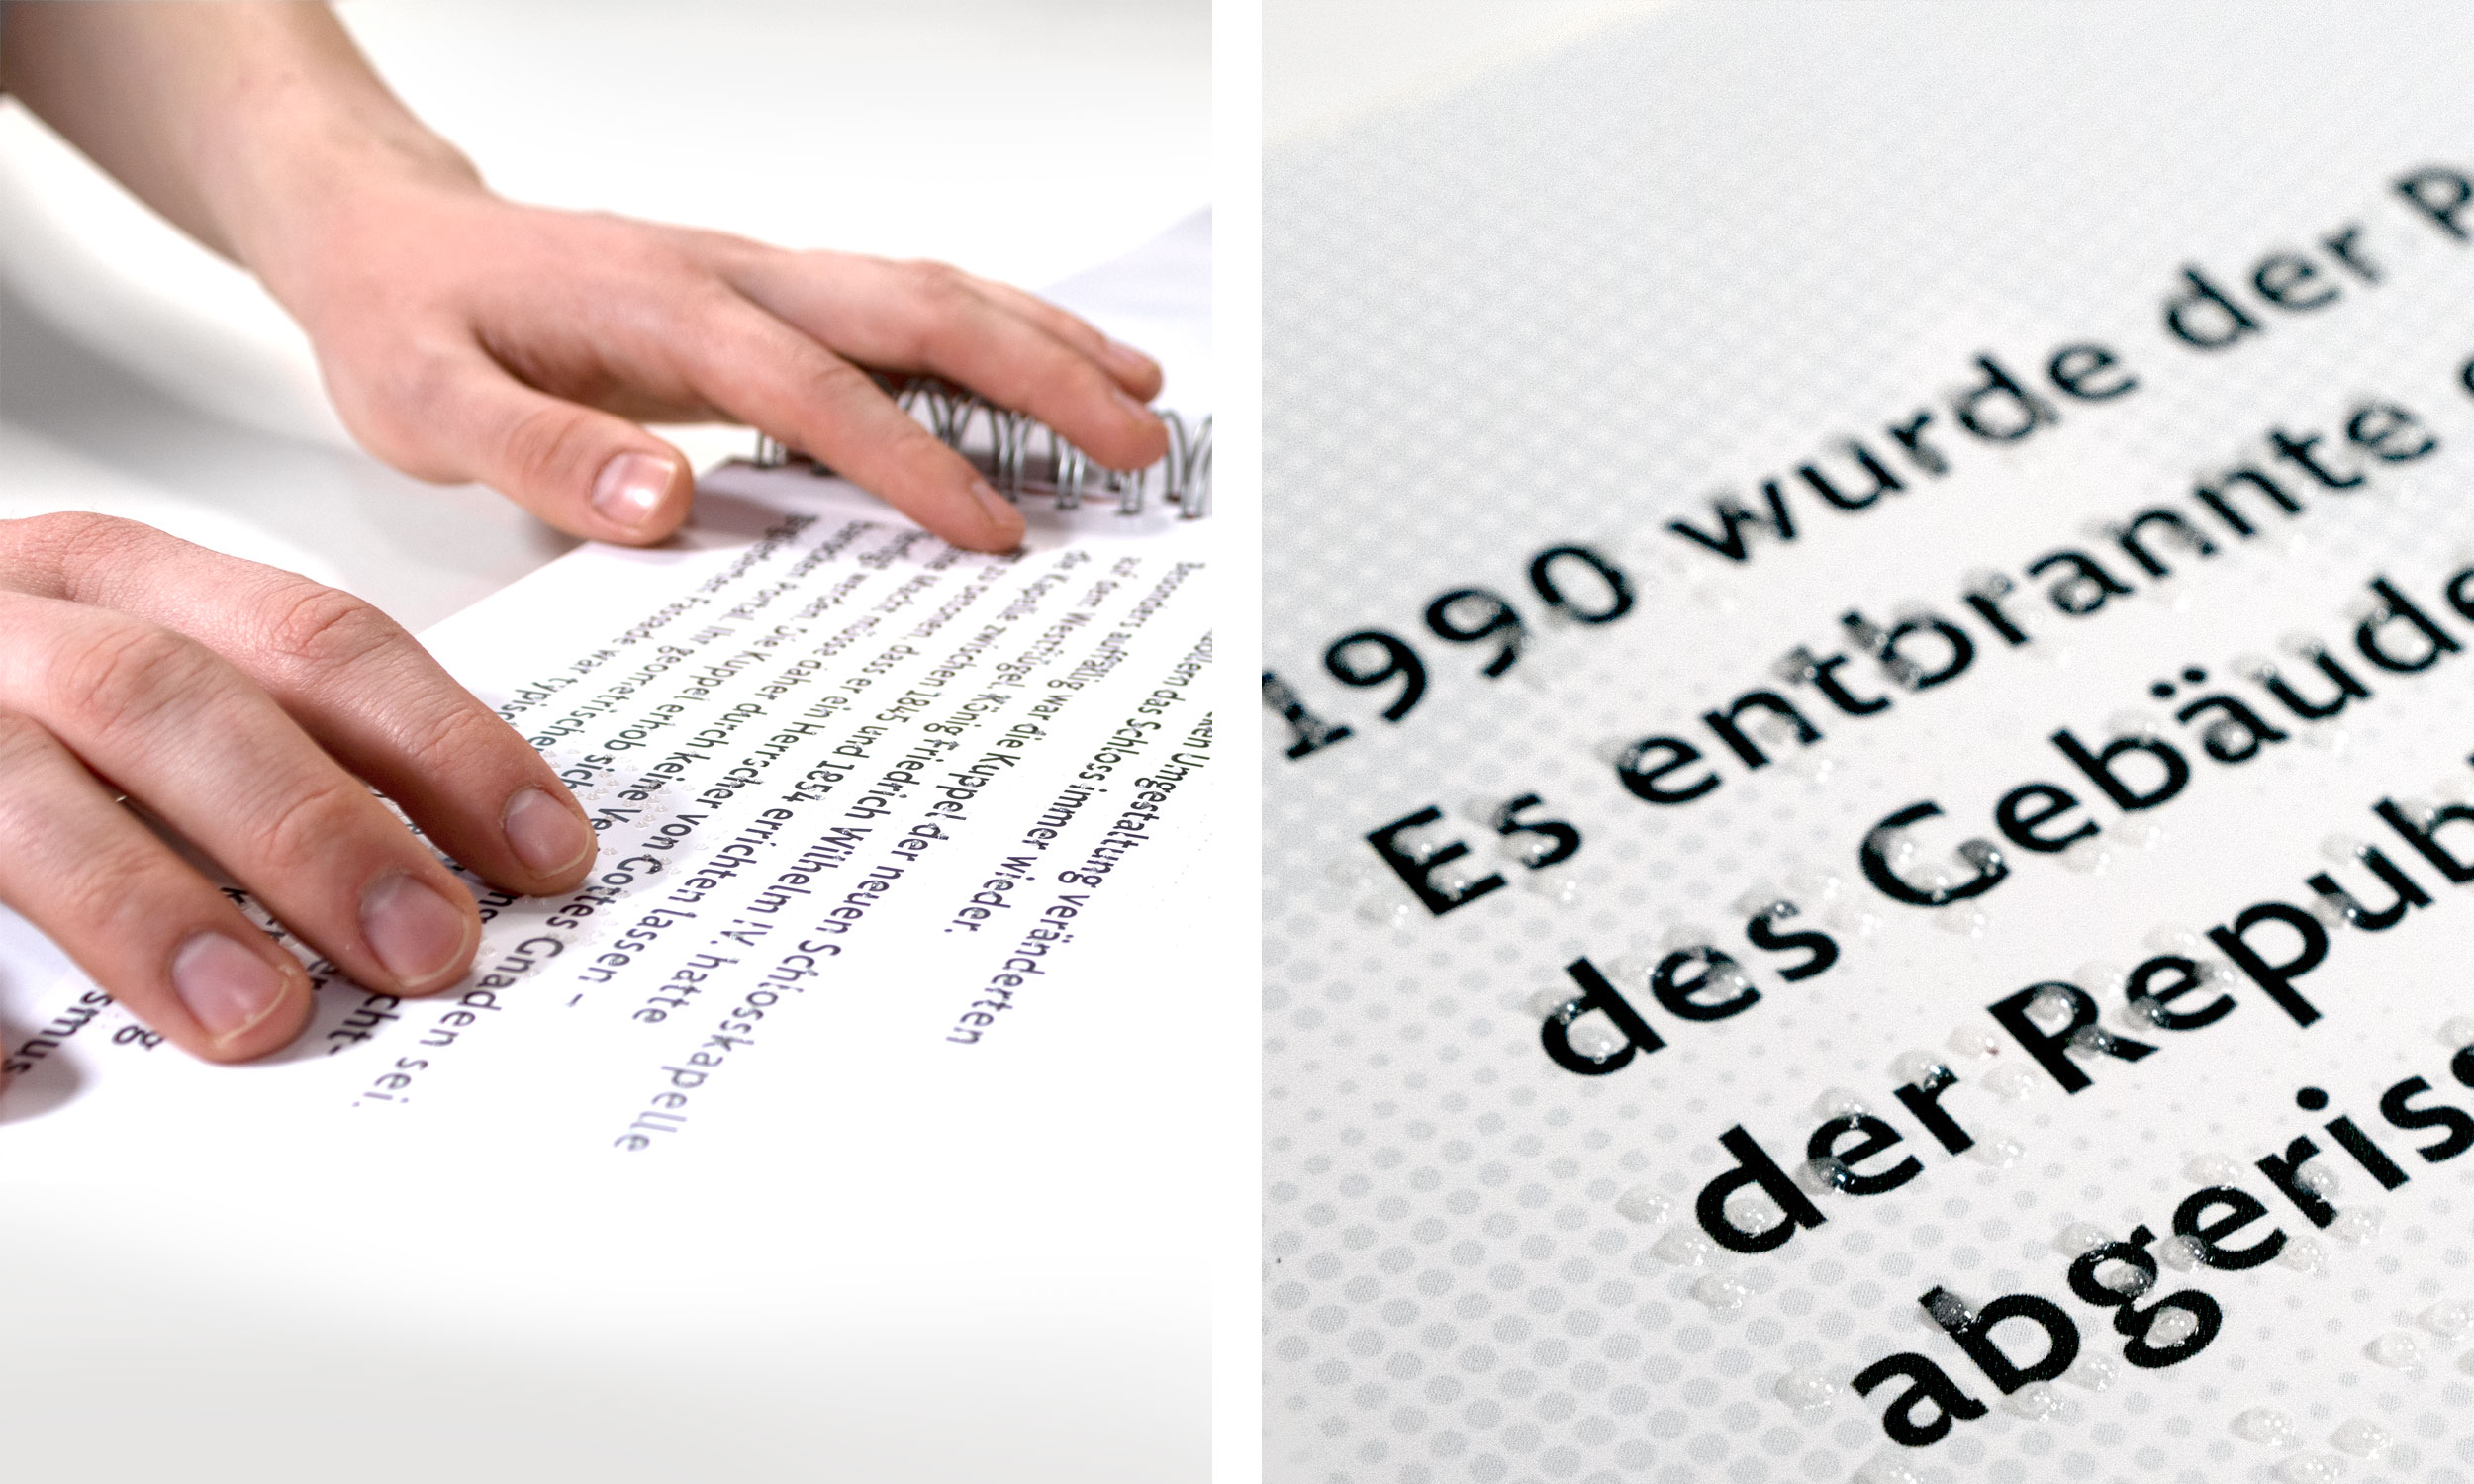 Left: A person reading braille on a text page of the tactile book. Right: Close-up of typographic details of a text page with blackletter and transparent braille.